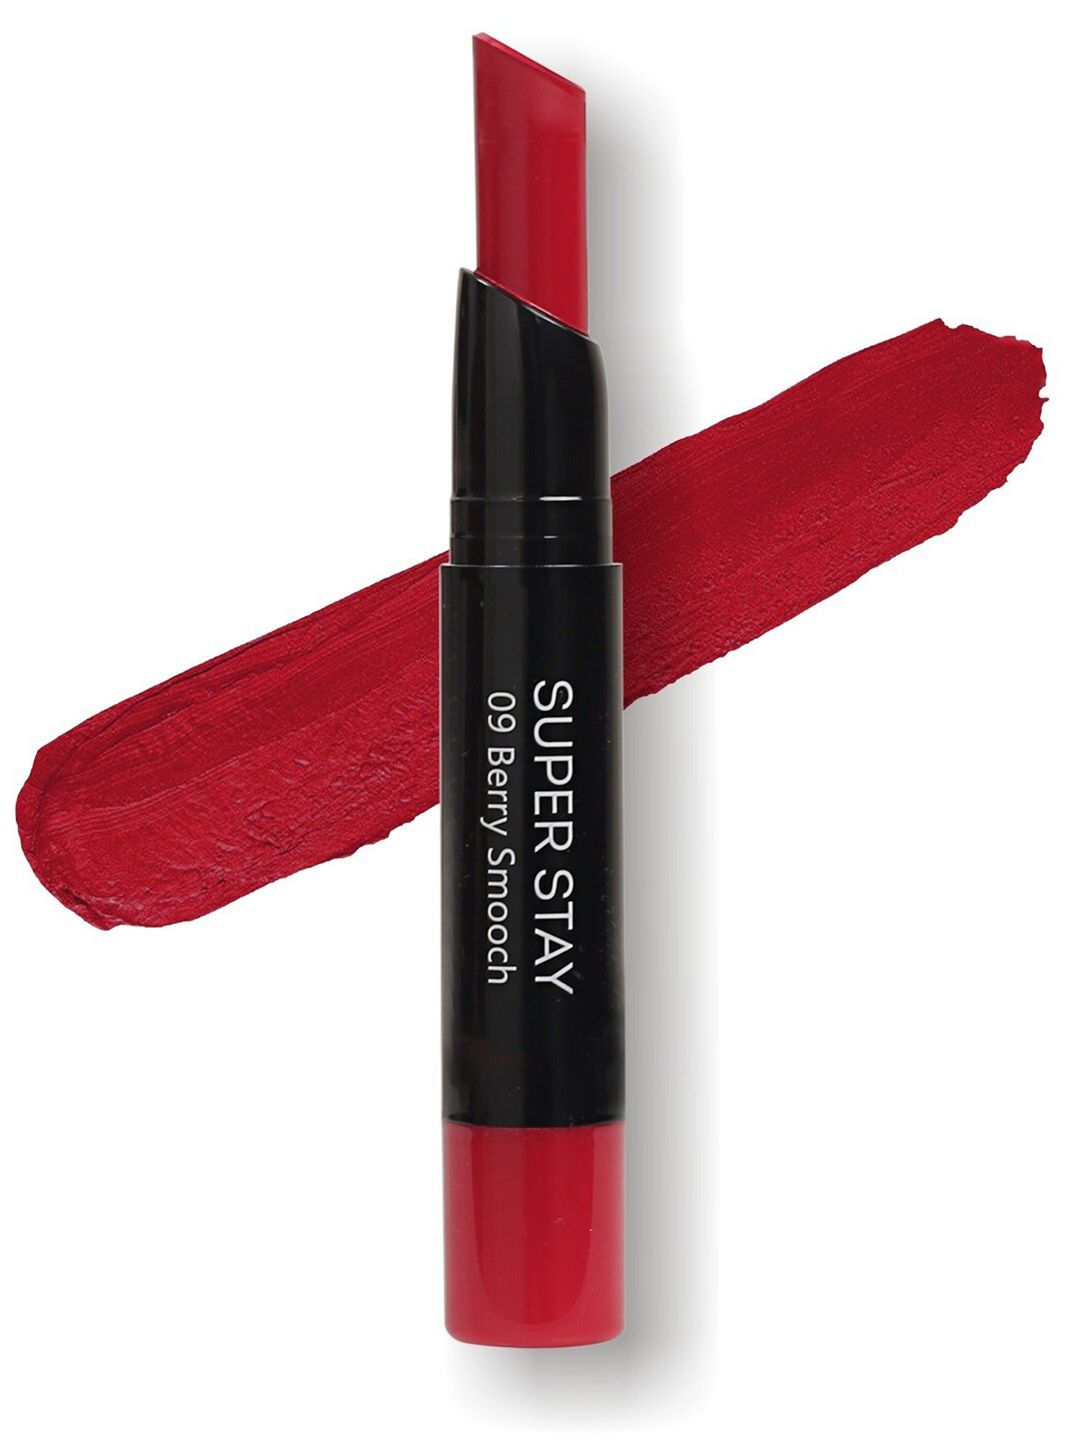 ME-ON Super Stay Lipstick Shade 09 - Berry Smooch 2g Price in India